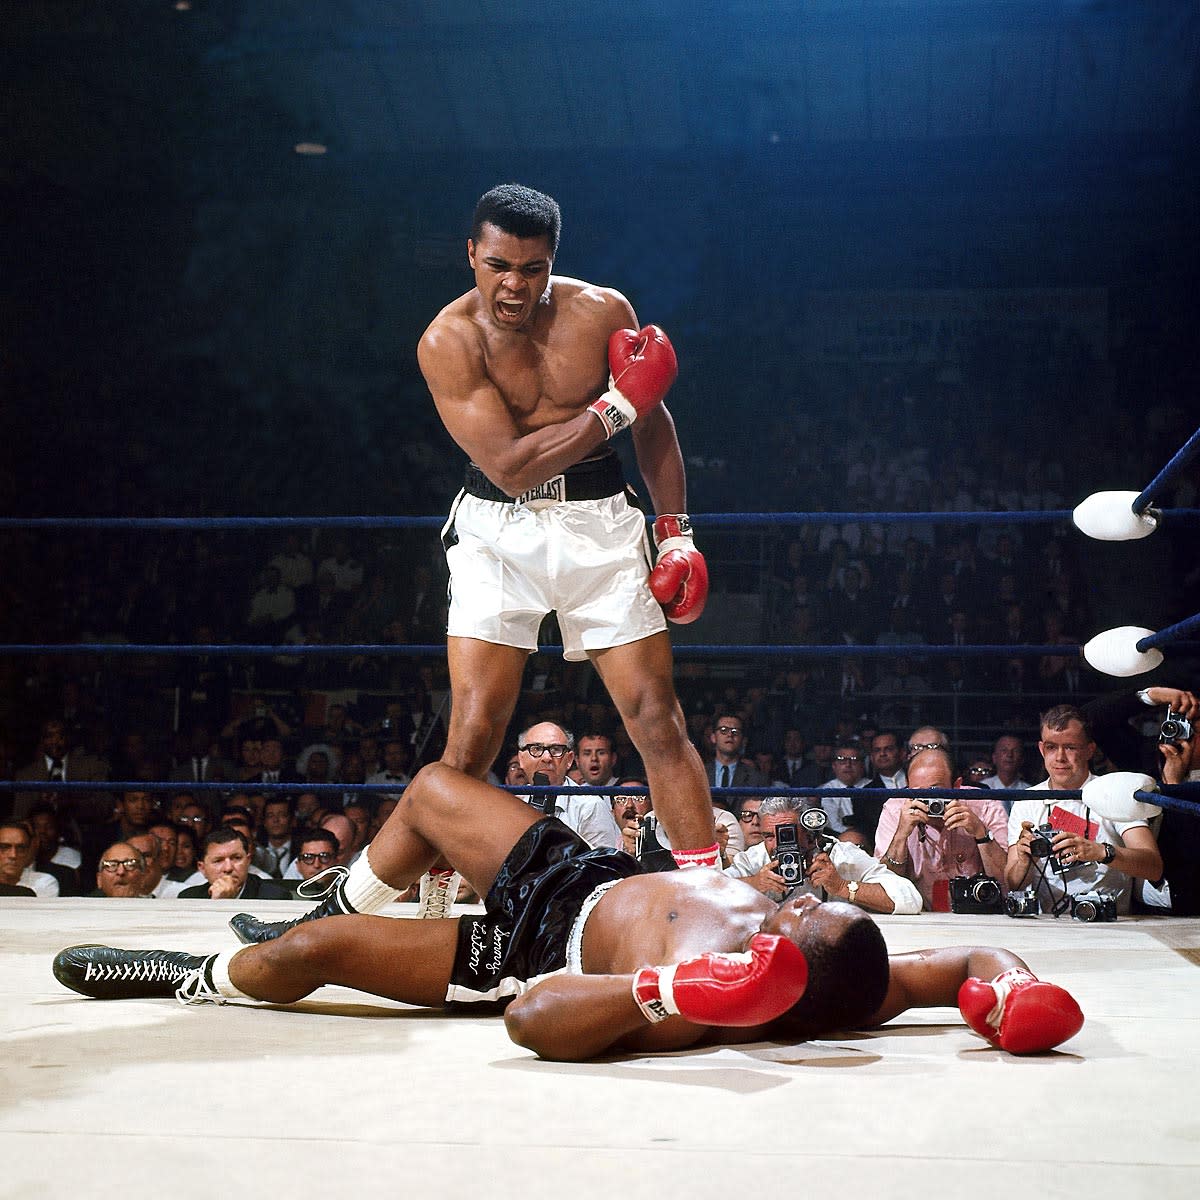 100 Greatest Sports Photos of All-Time - Sports Illustrated